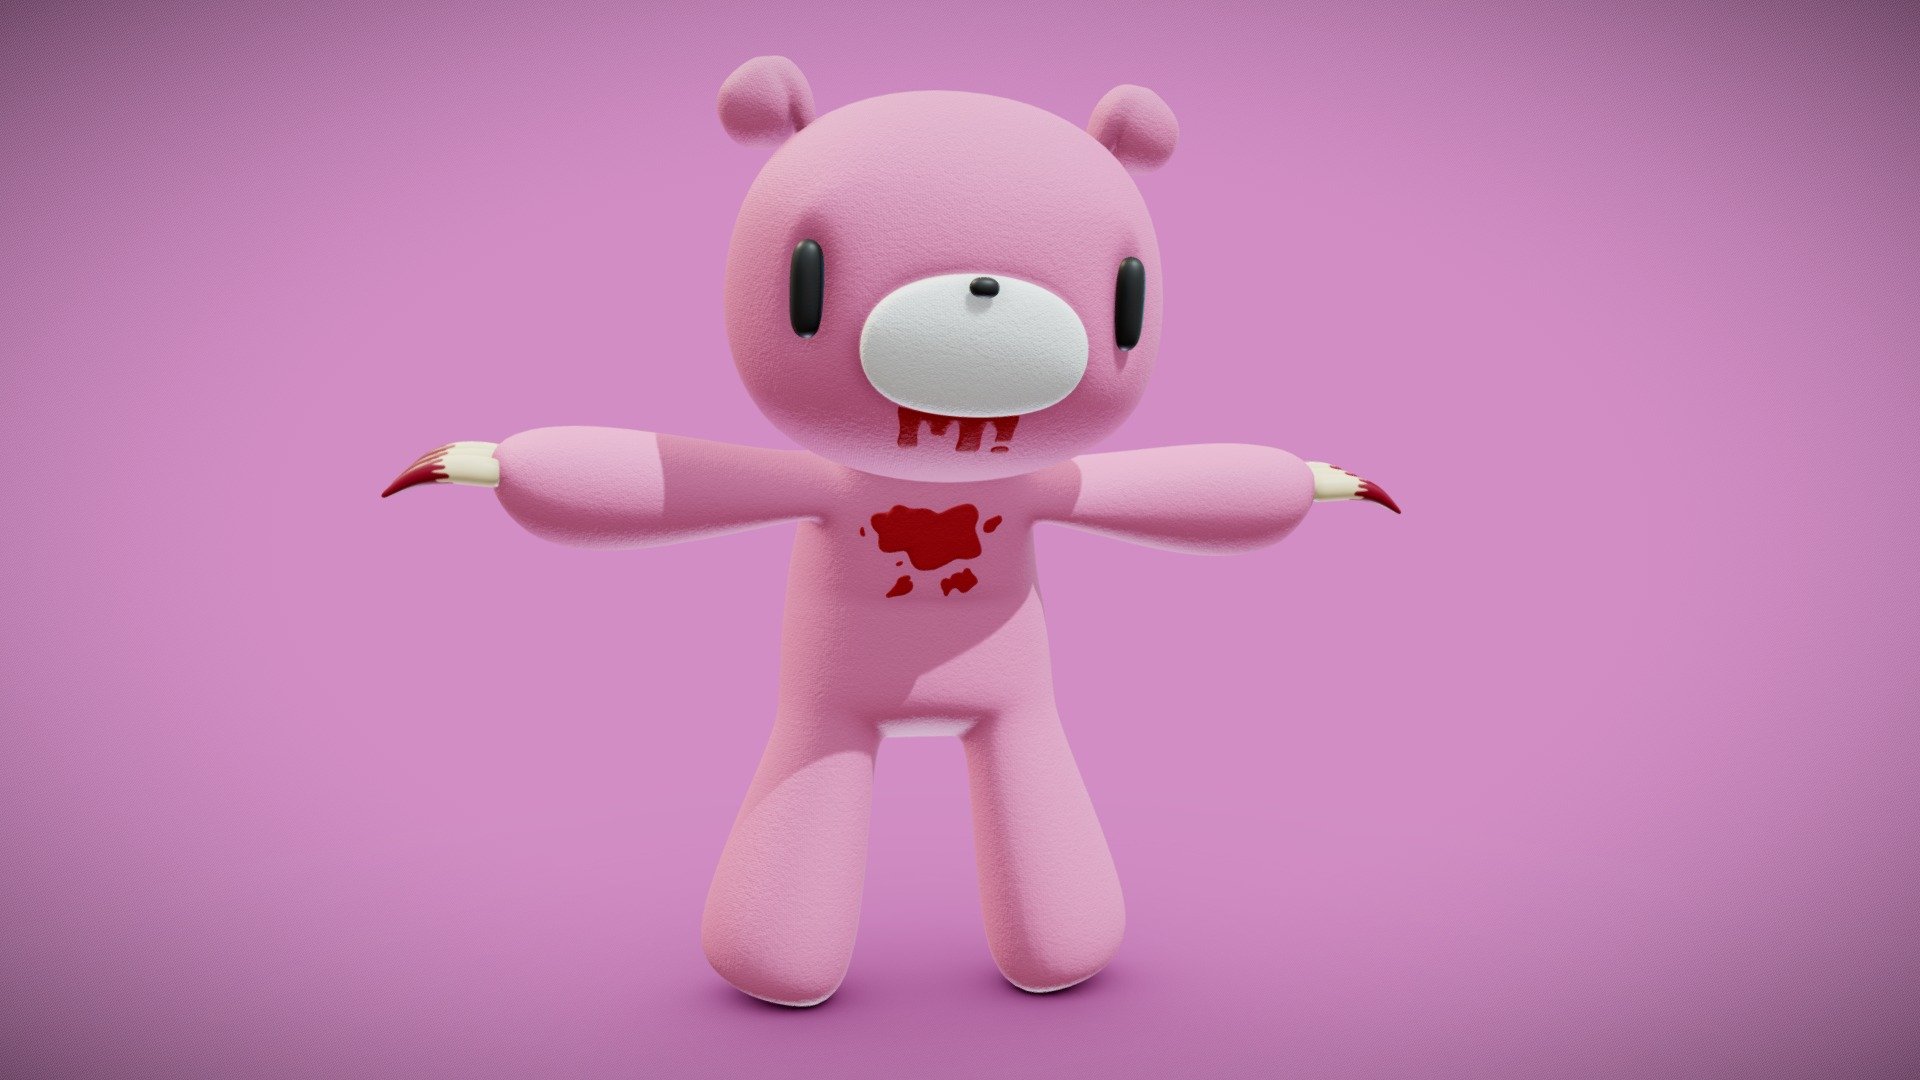 Download A Pink Teddy Bear With Blood On It Wallpaper  Wallpaperscom